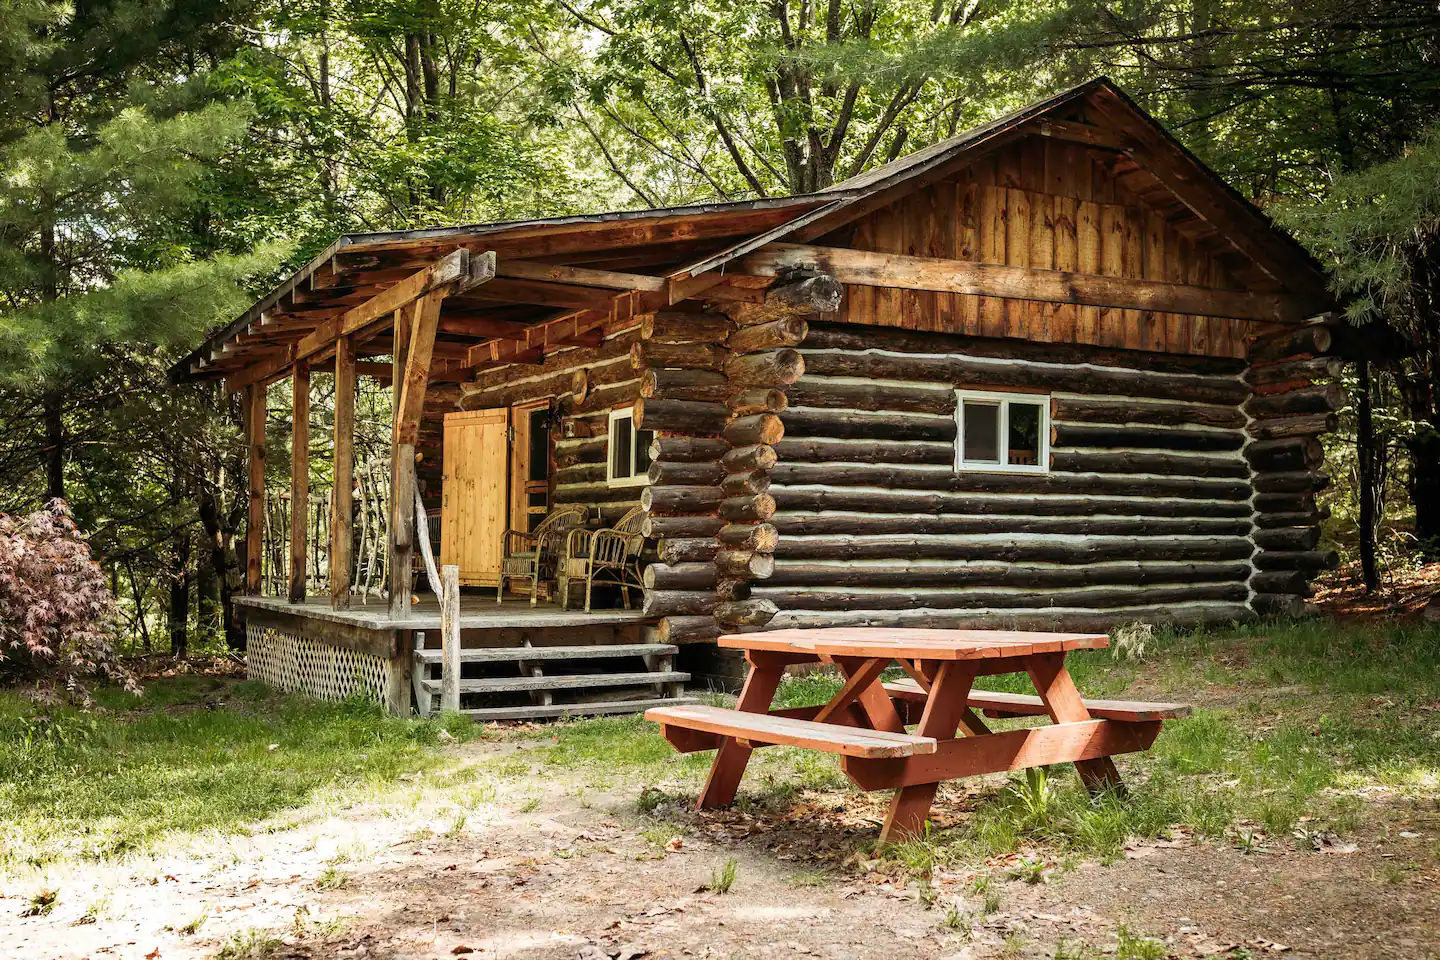 A log cabin for rent in New York's Finger Lakes region. Photo credit: Airbnb